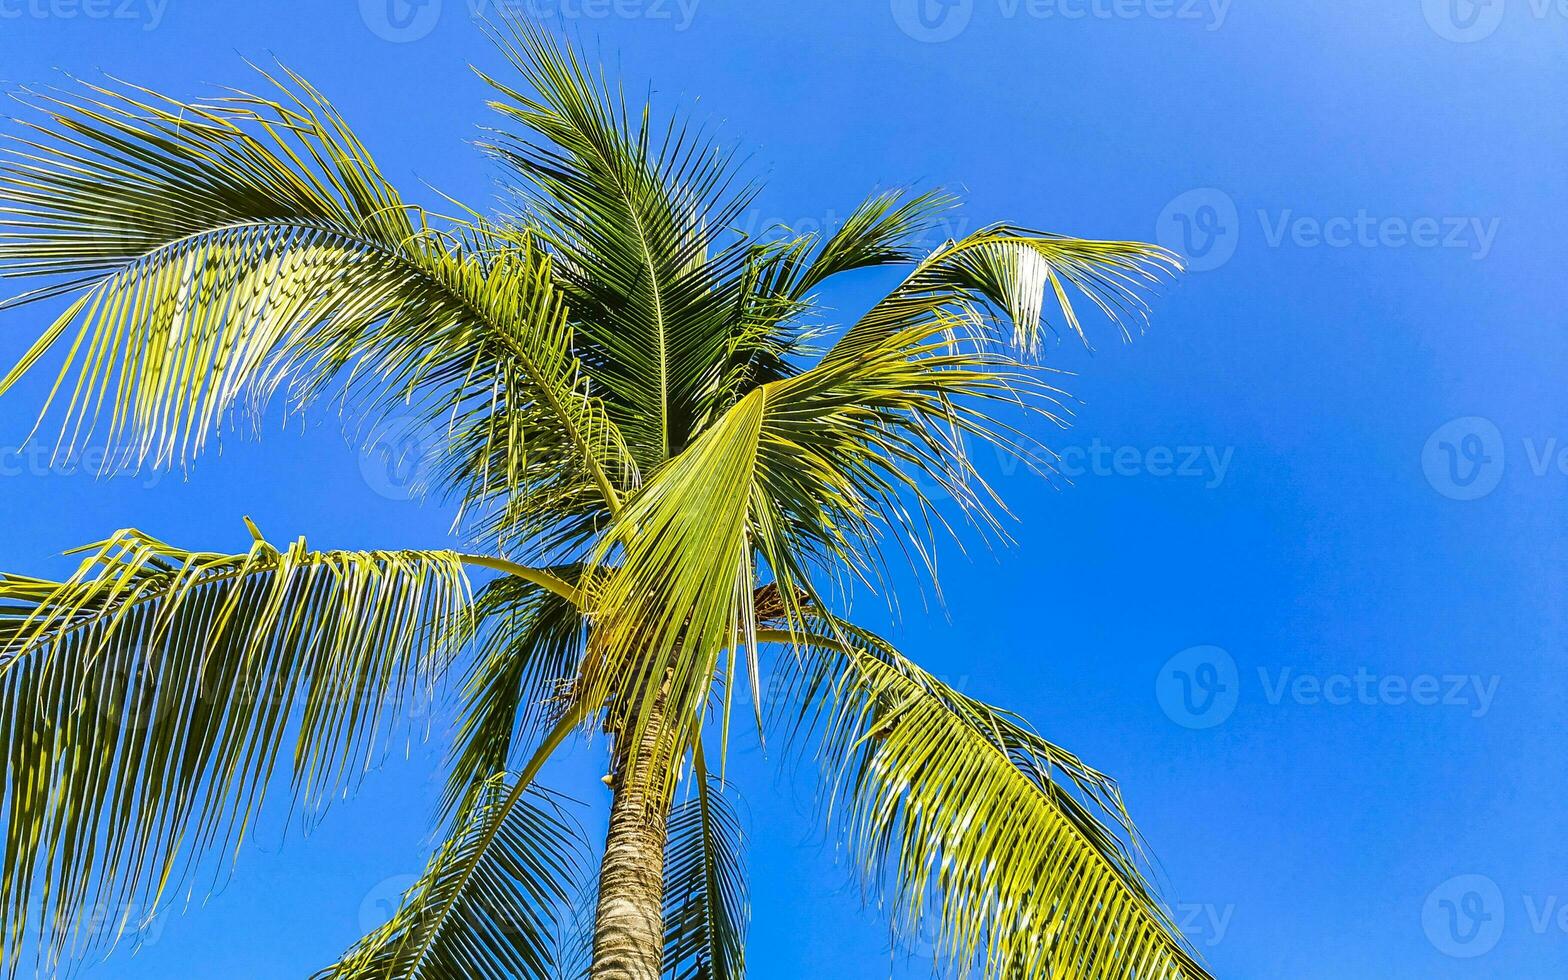 Tropical natural palm tree coconuts blue sky in Mexico. photo